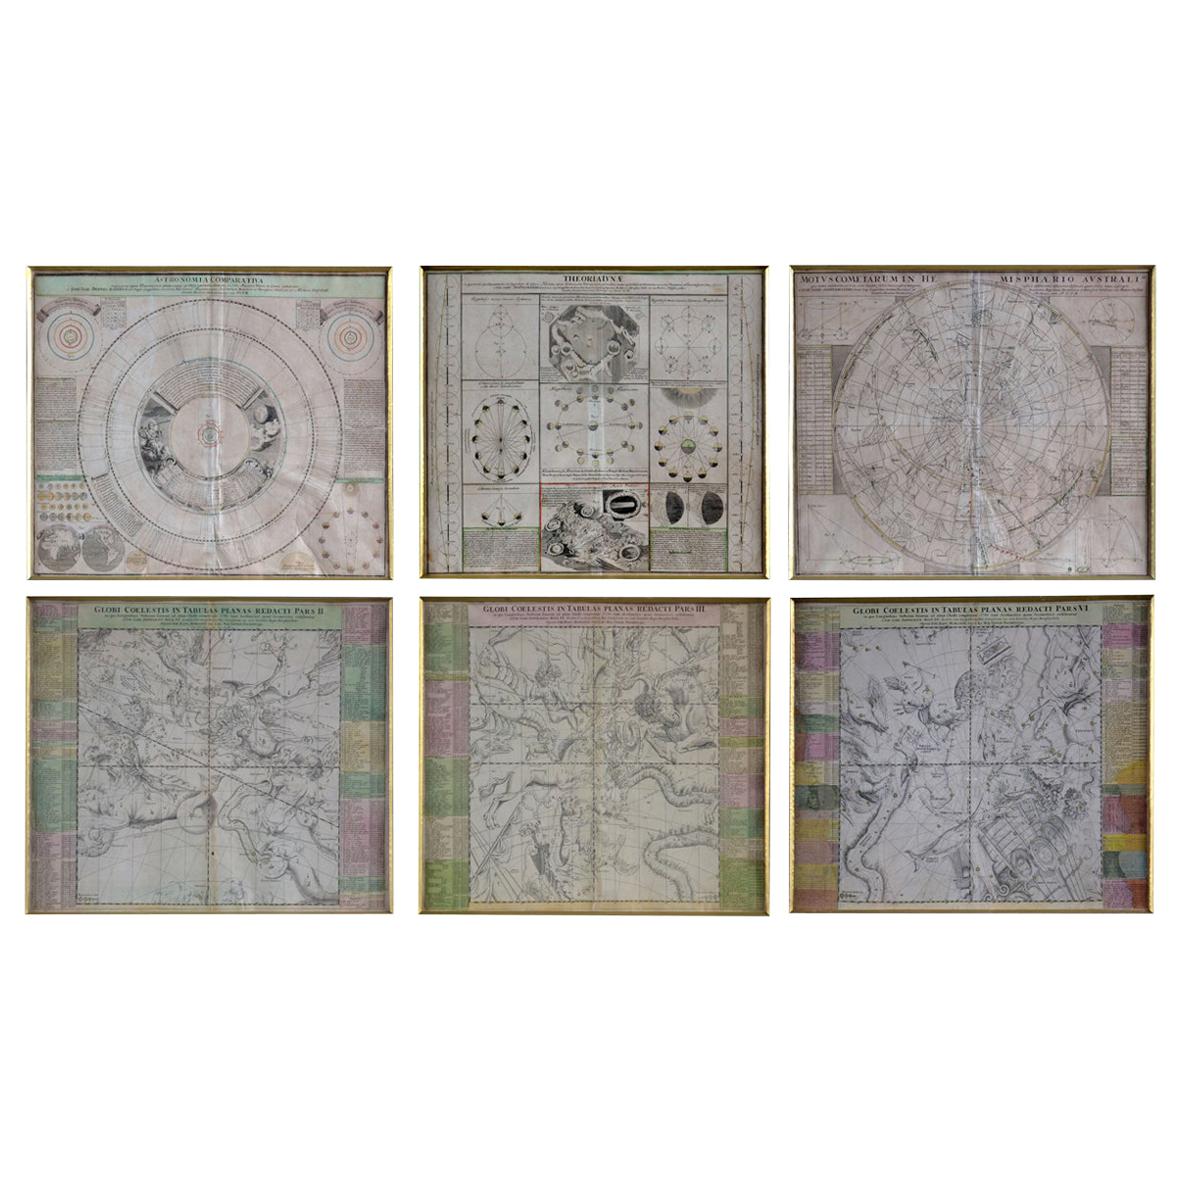 Six 18th Century Celestial Charts Engravings in Brass Frames by Doppelmayr